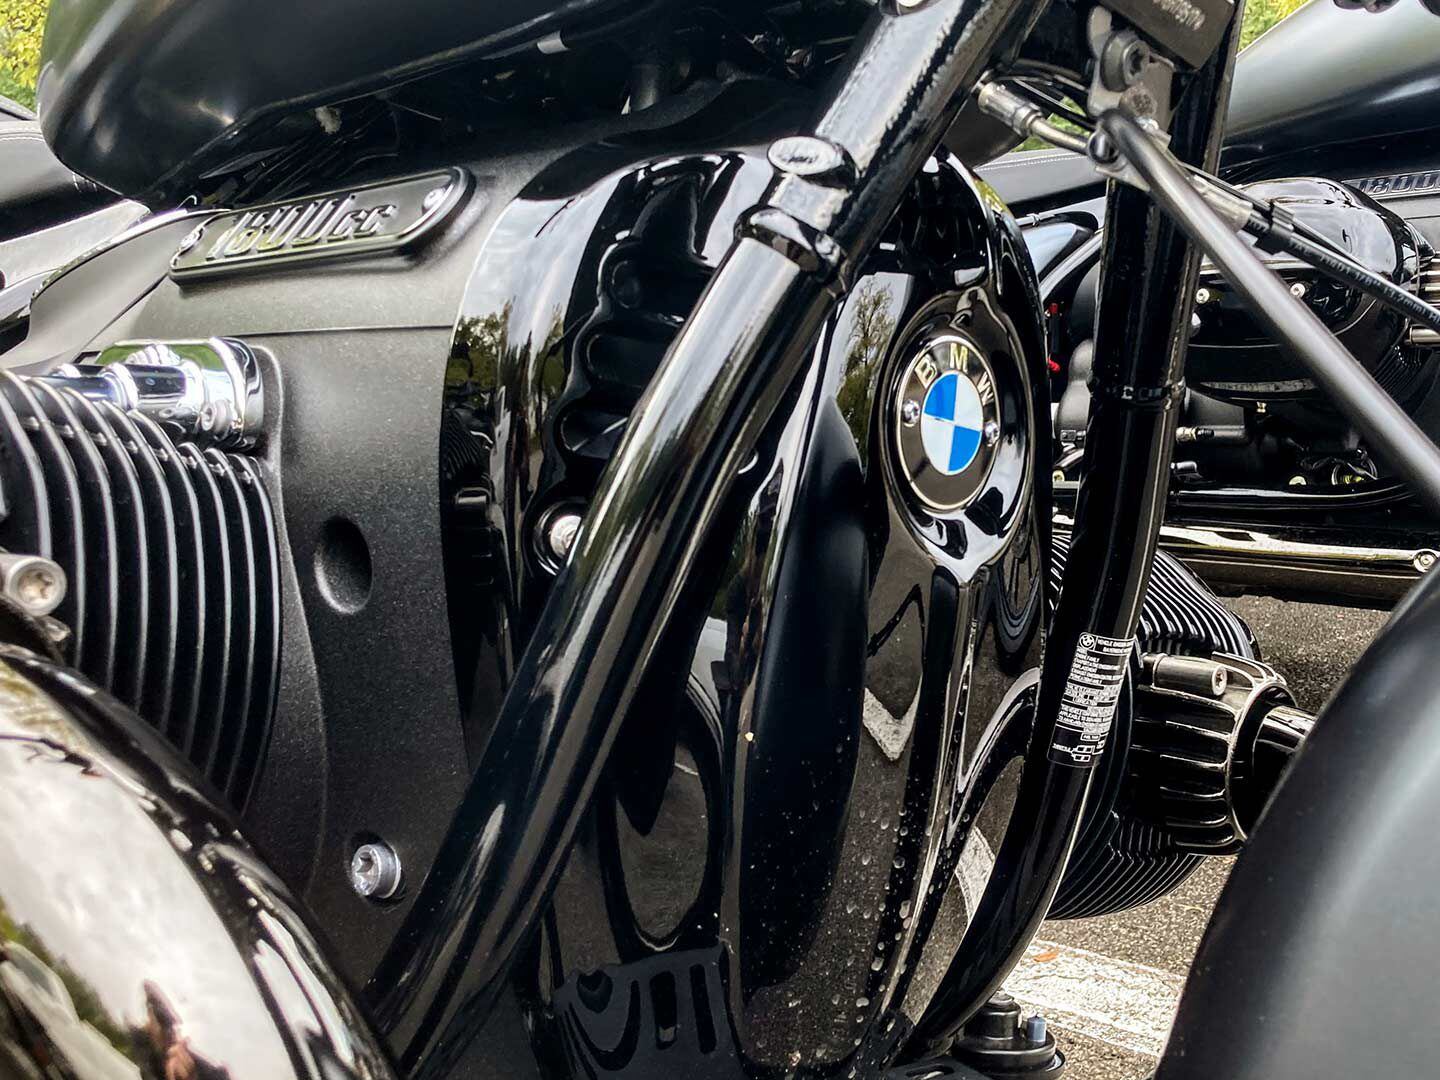 The R 18 Roctane’s blacked-out 1,802cc air-and-oil-cooled boxer engine wears a badge in place of a heart on its ample sleeve.